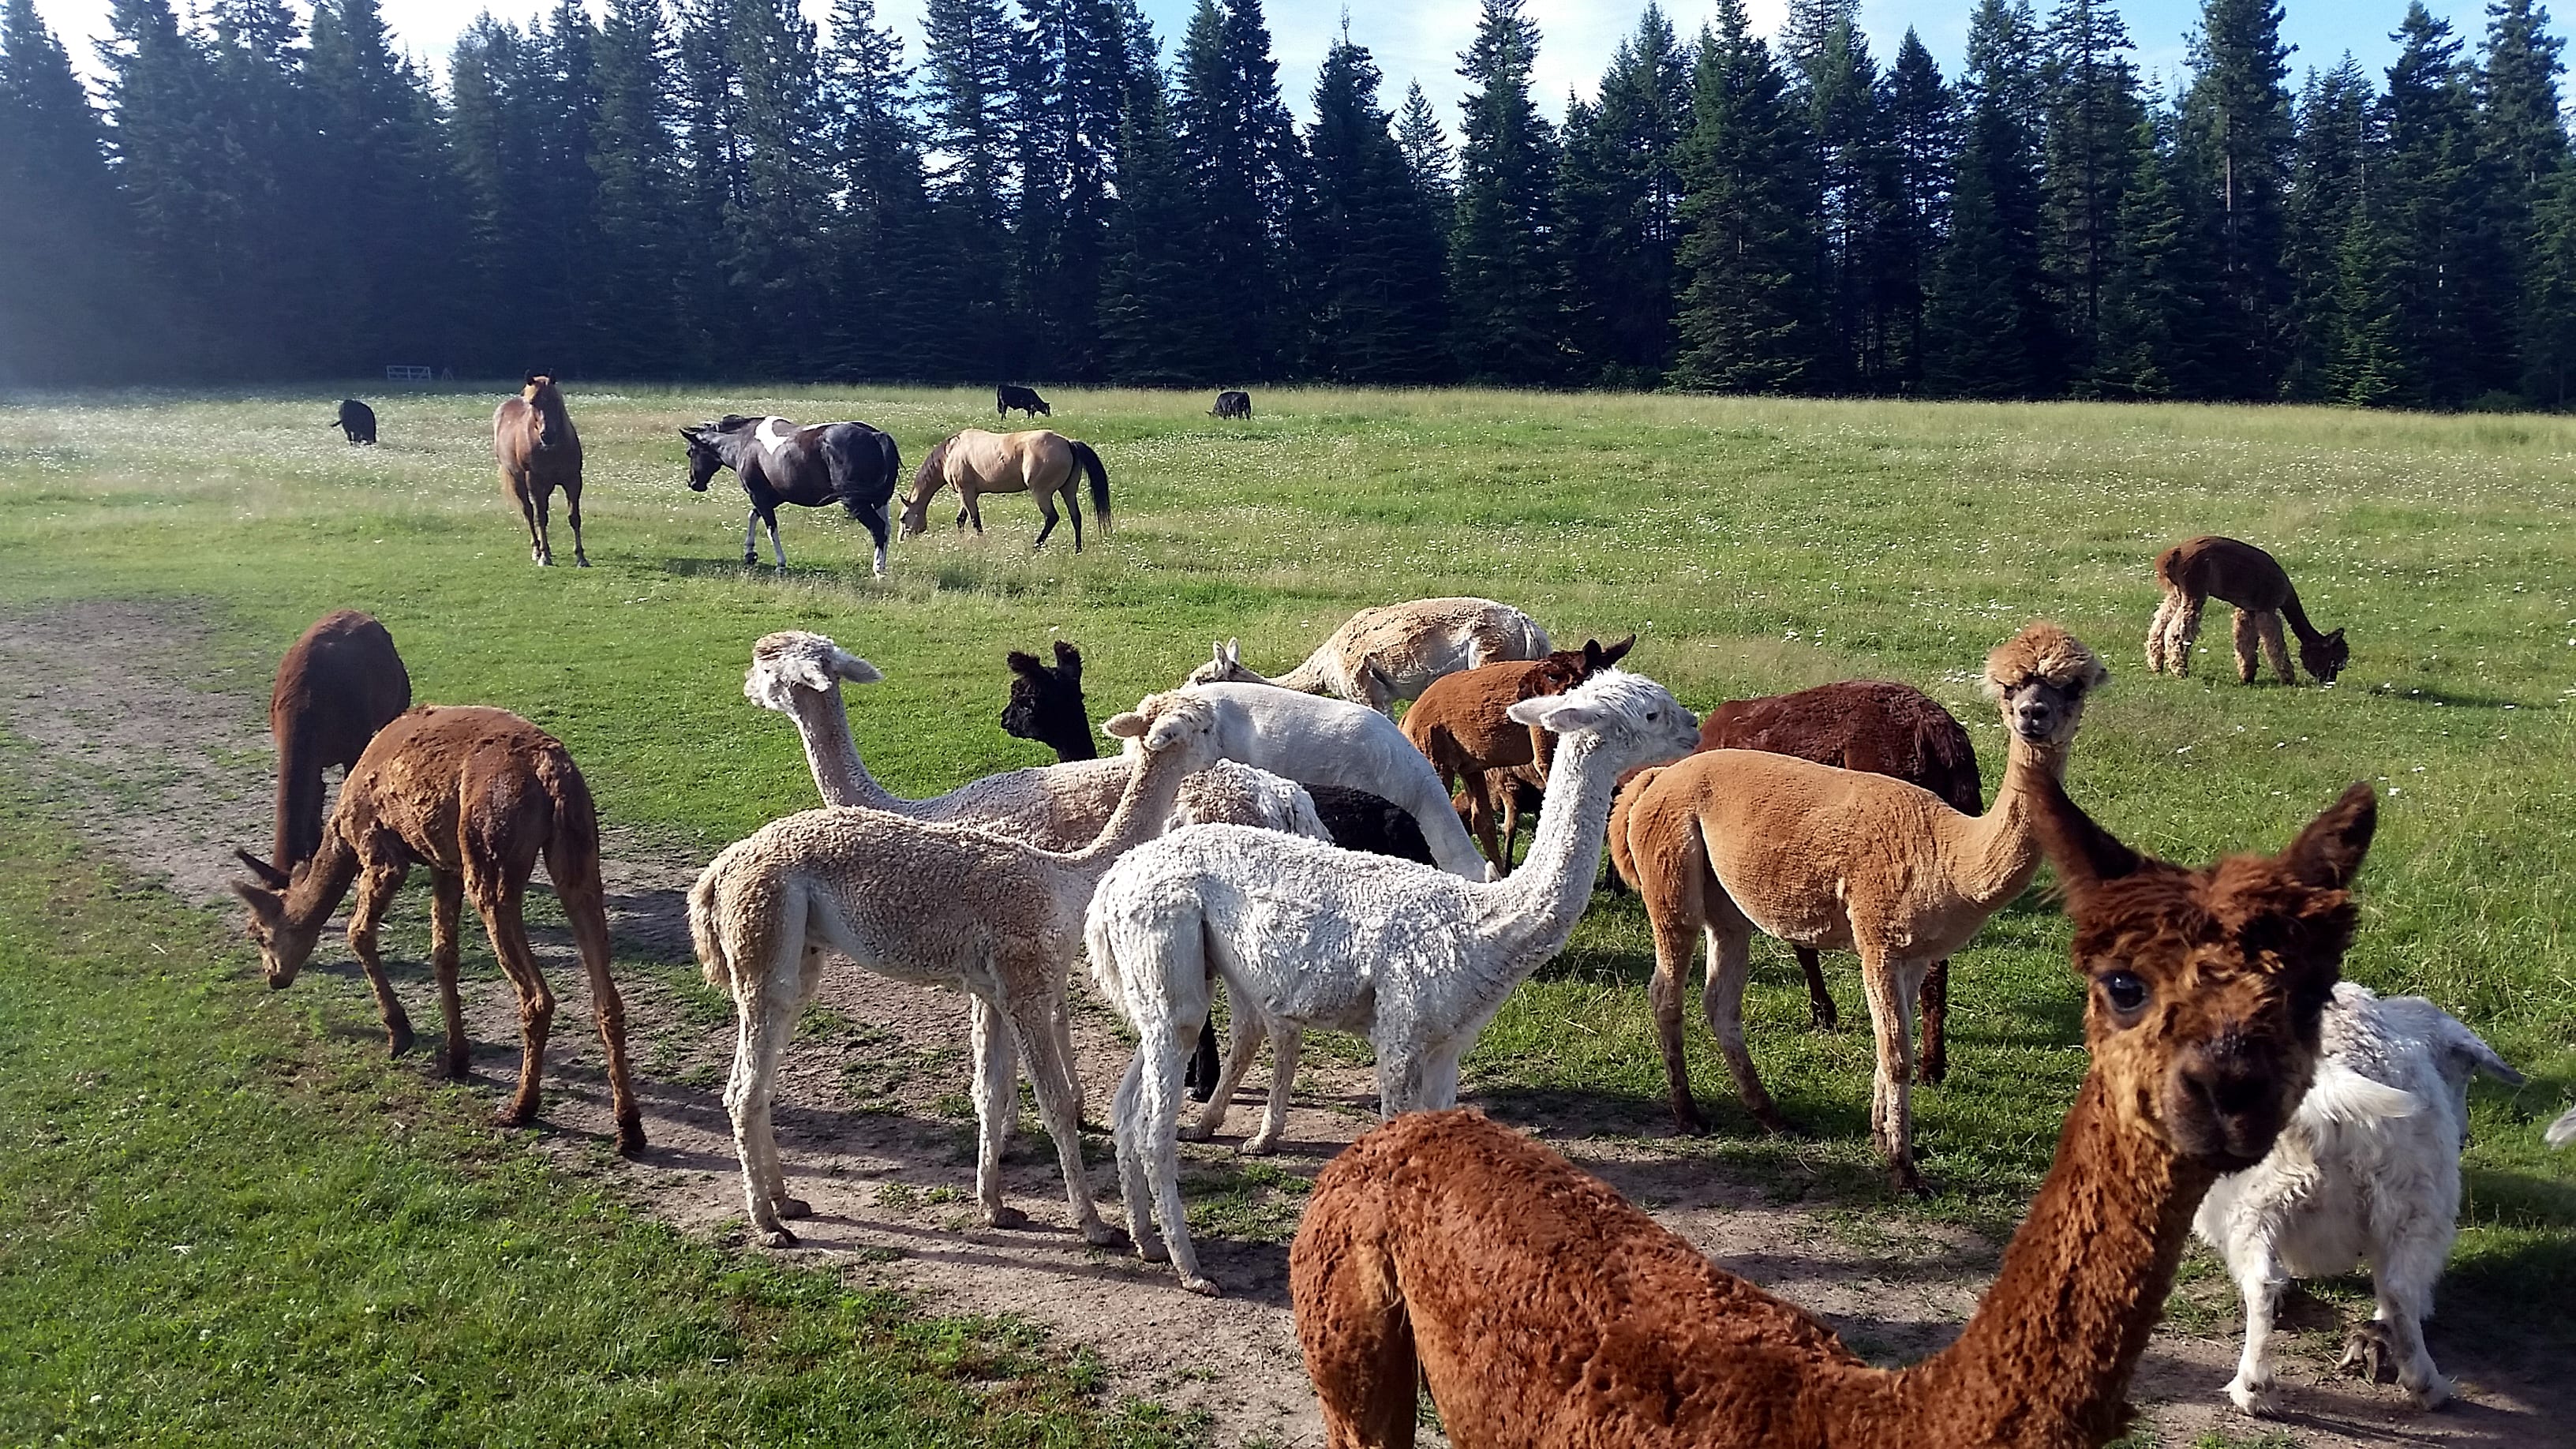 Alpacas and other livestock that share our land